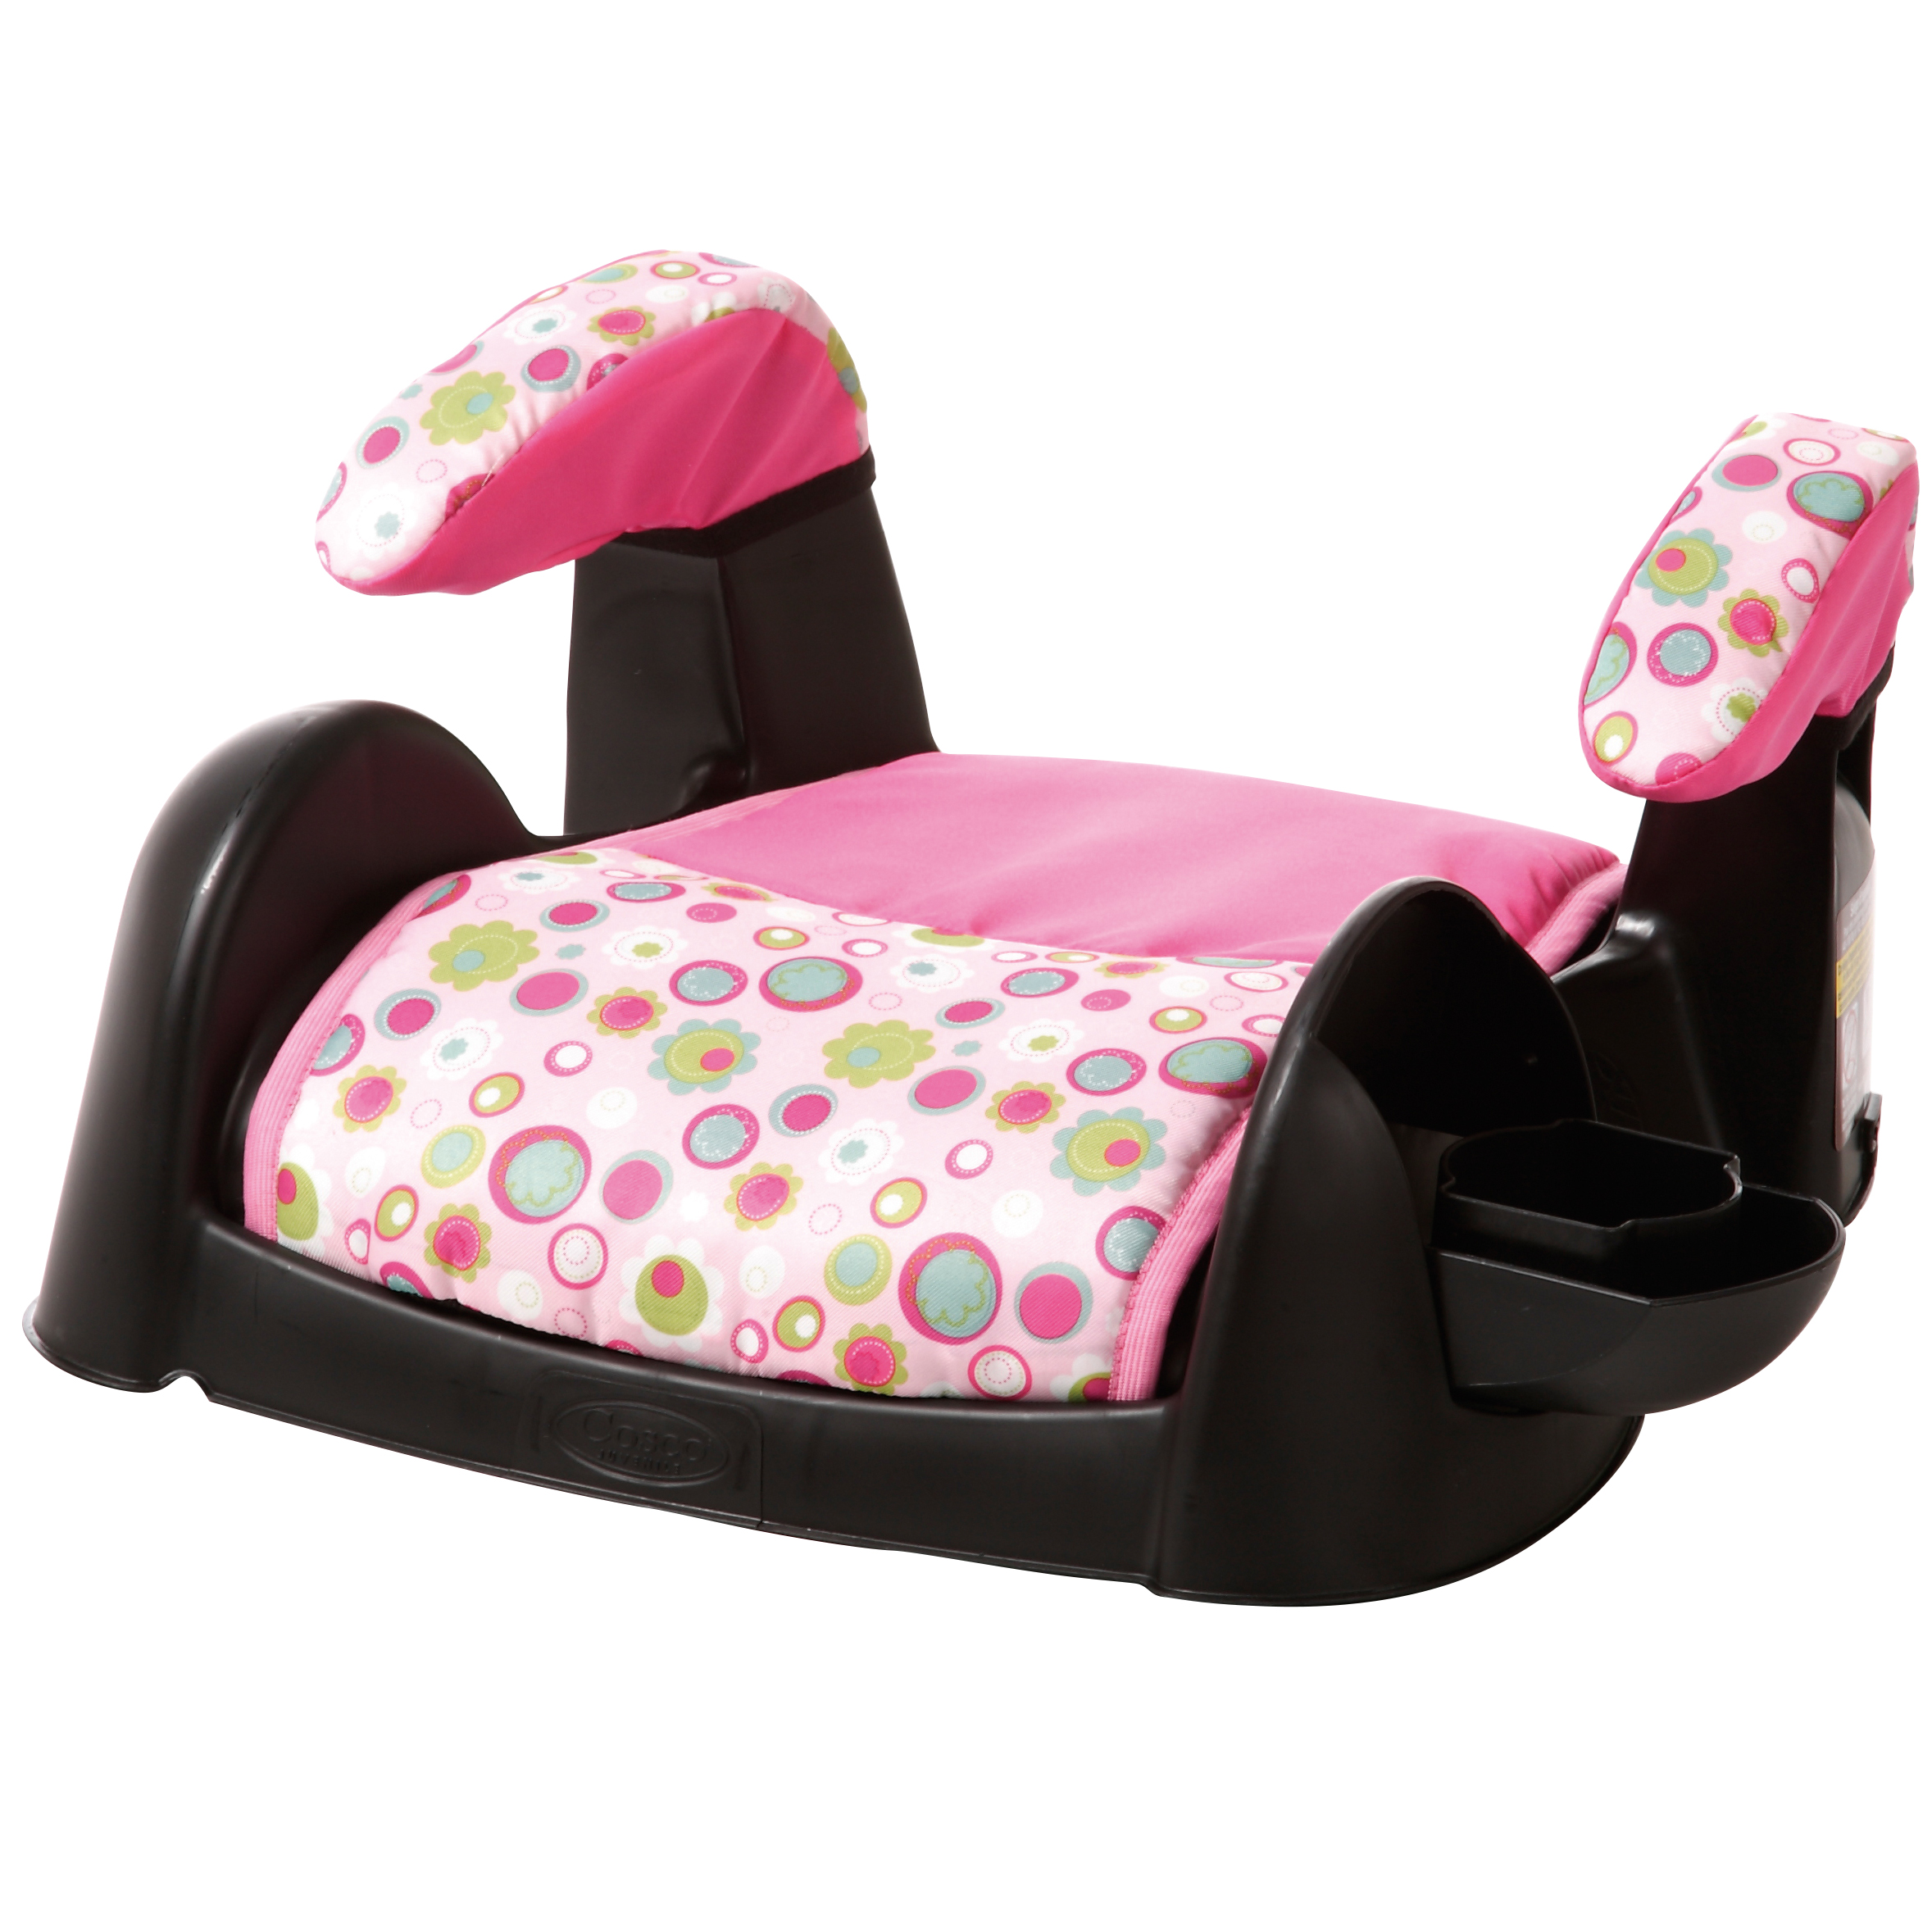 Cosco Ambassador Backless Booster Car Seat, Magical Moonlight - image 1 of 3